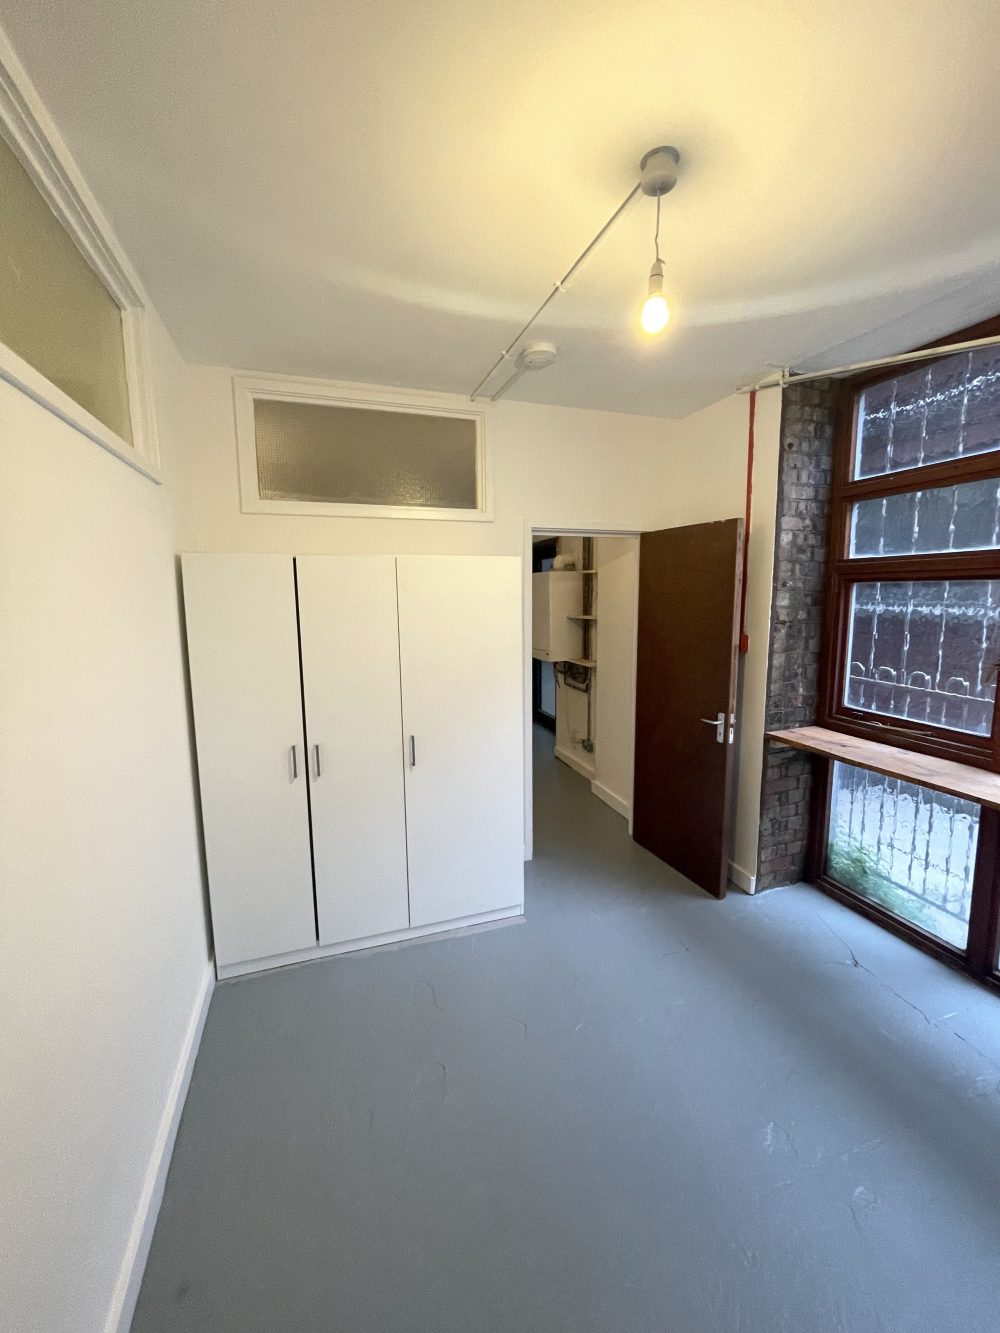 2 Bedroom Flat Available to rent in E9 London Fields Enterprise House Pic25